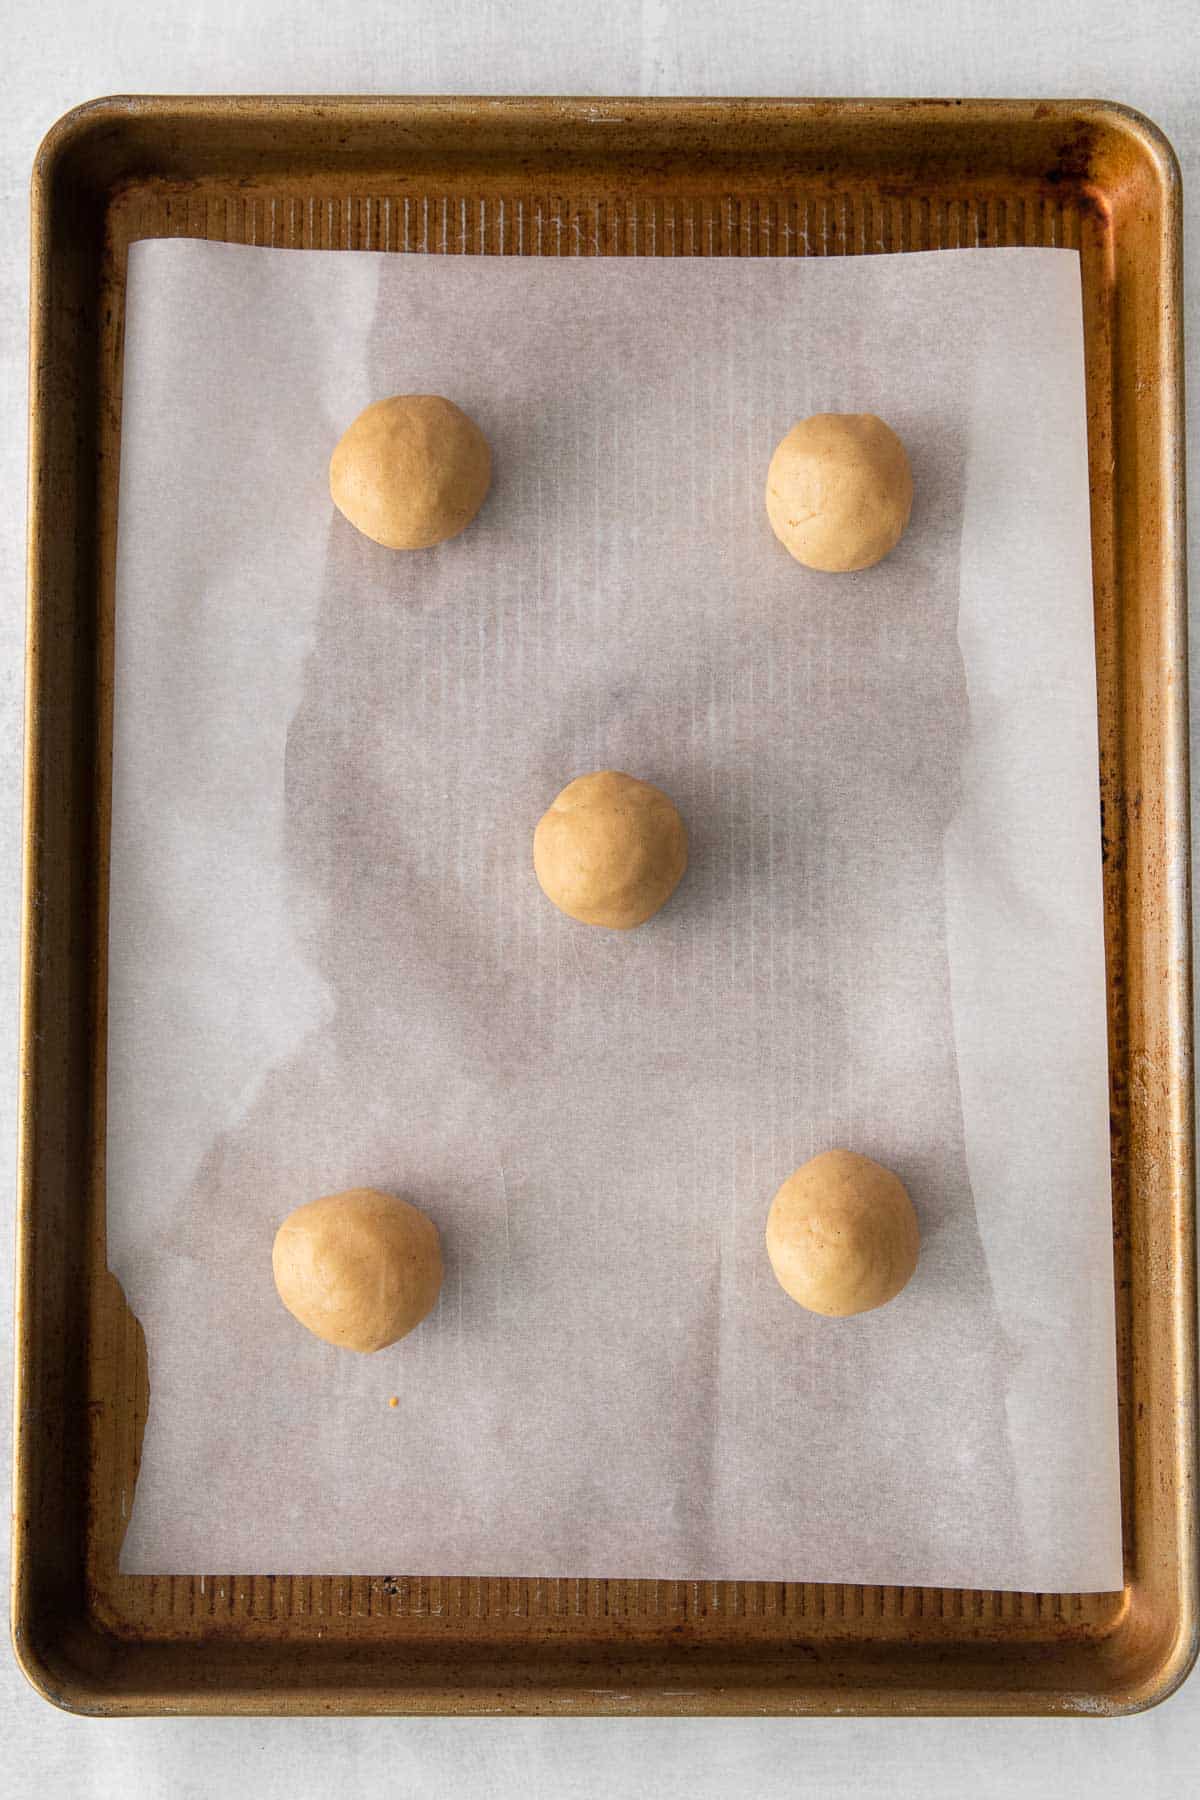 baking sheet lined with white parchment paper with 5 cookie dough balls.